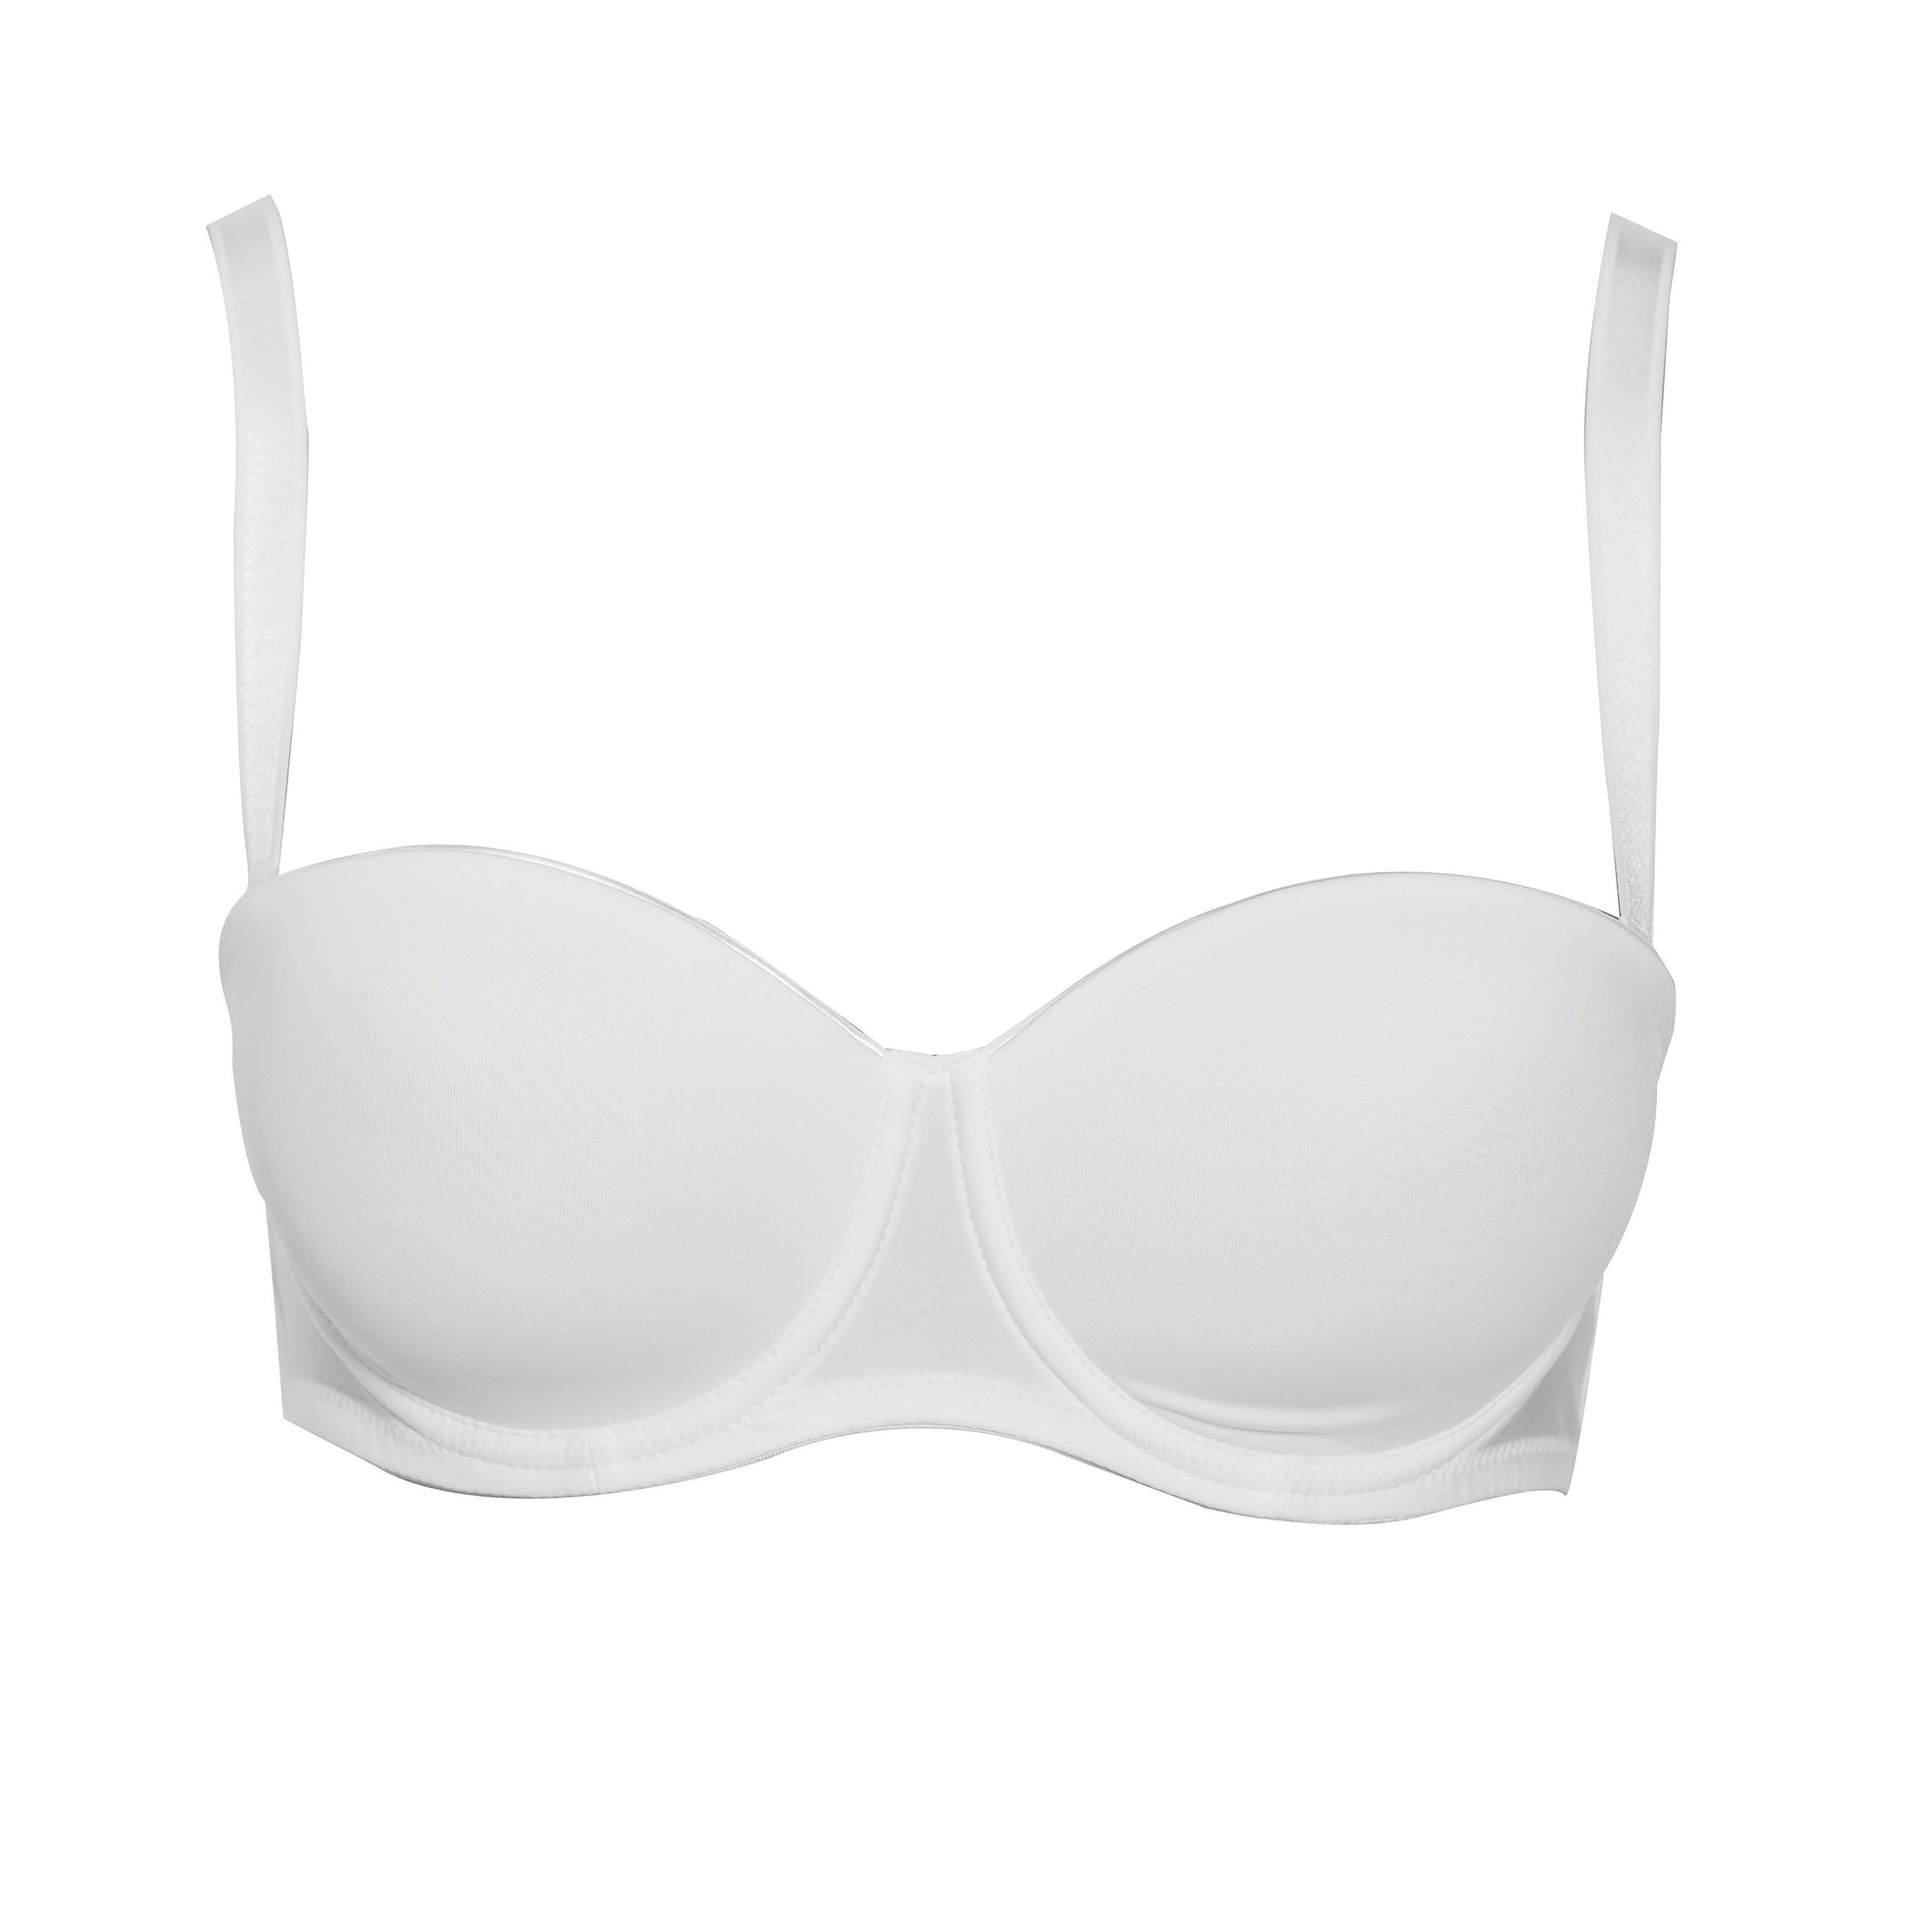 Preshaped cup bra - Collection Elegance By Leilieve